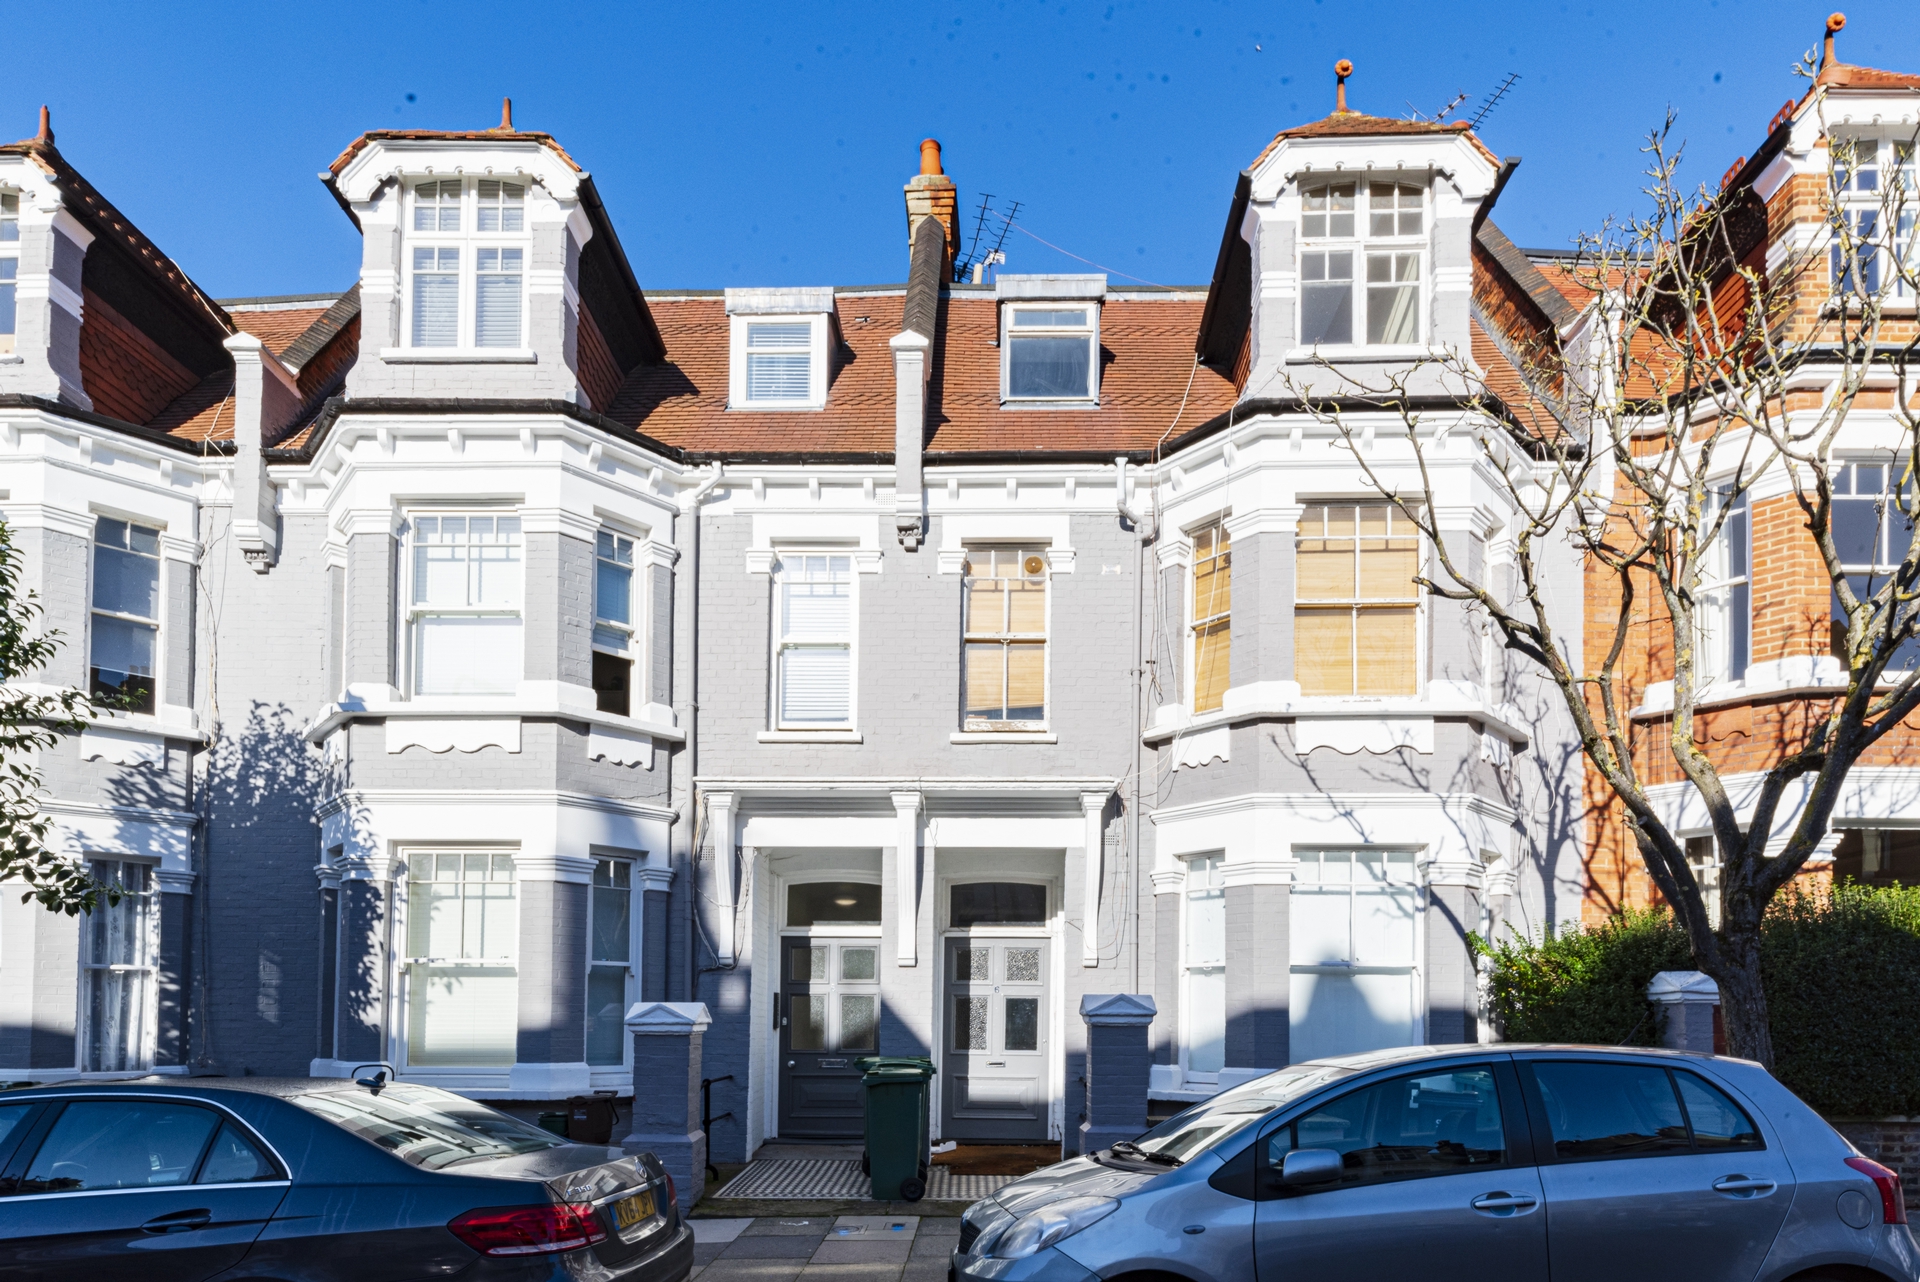 Similar Property: Flat in West Hampstead